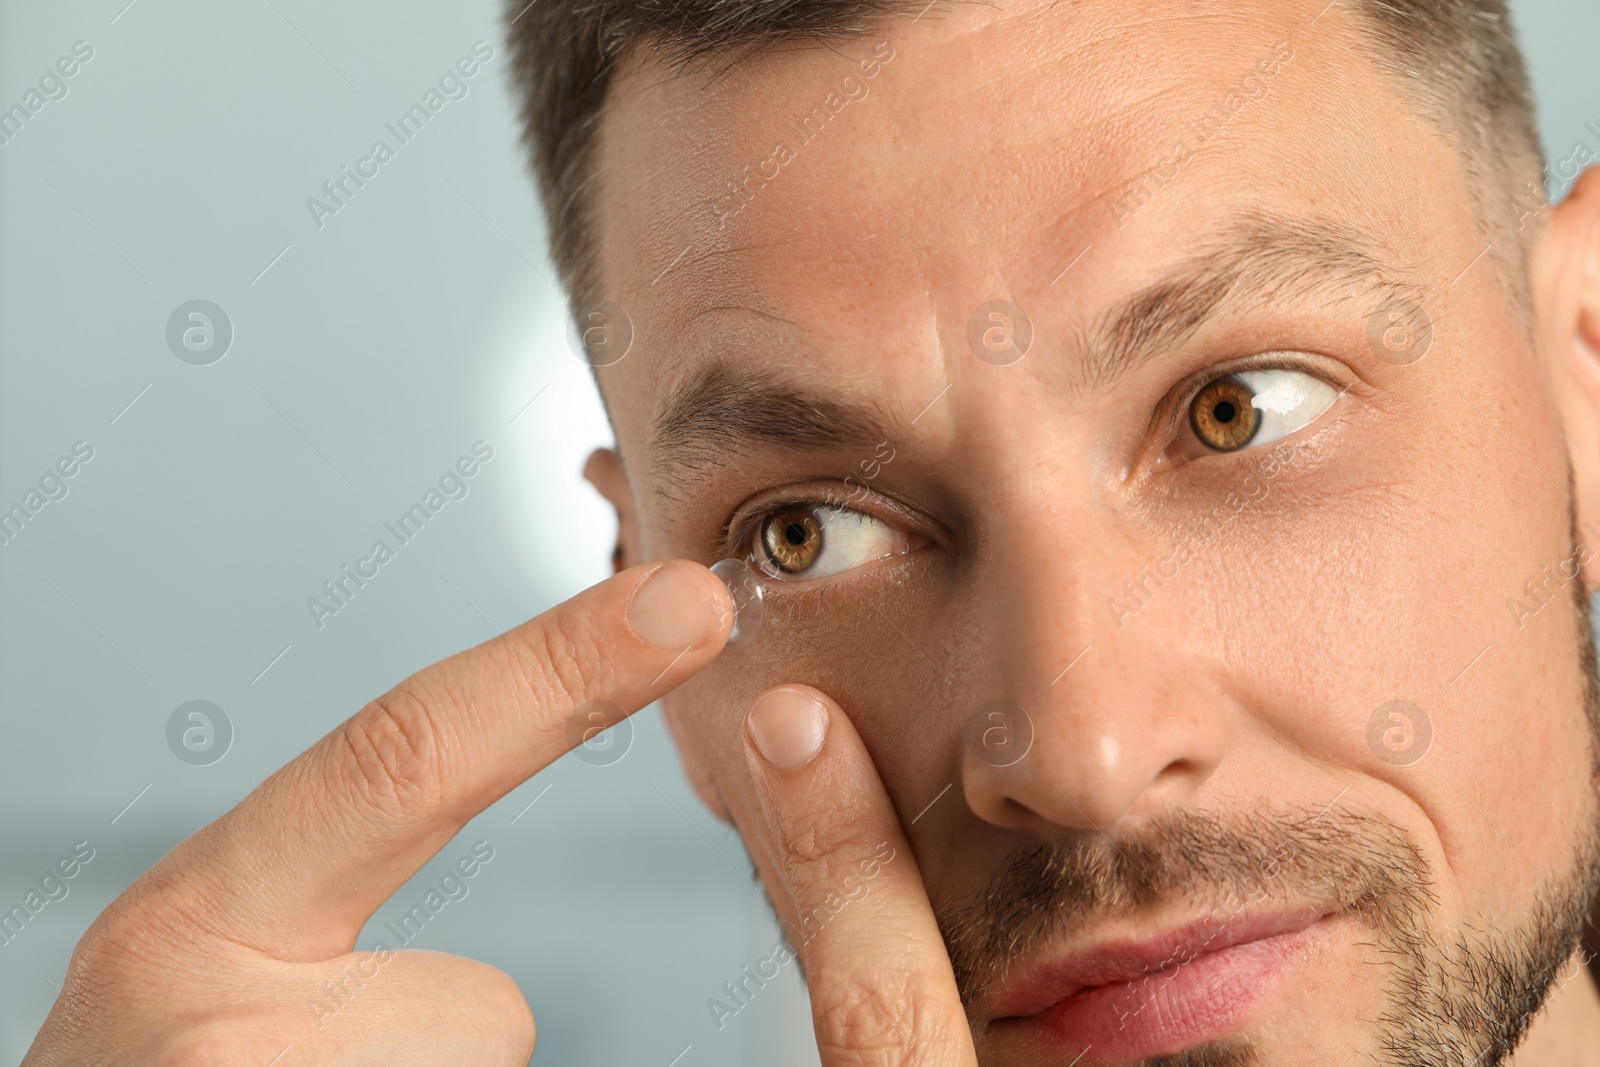 Photo of Man putting contact lens in his eye on blurred background, closeup